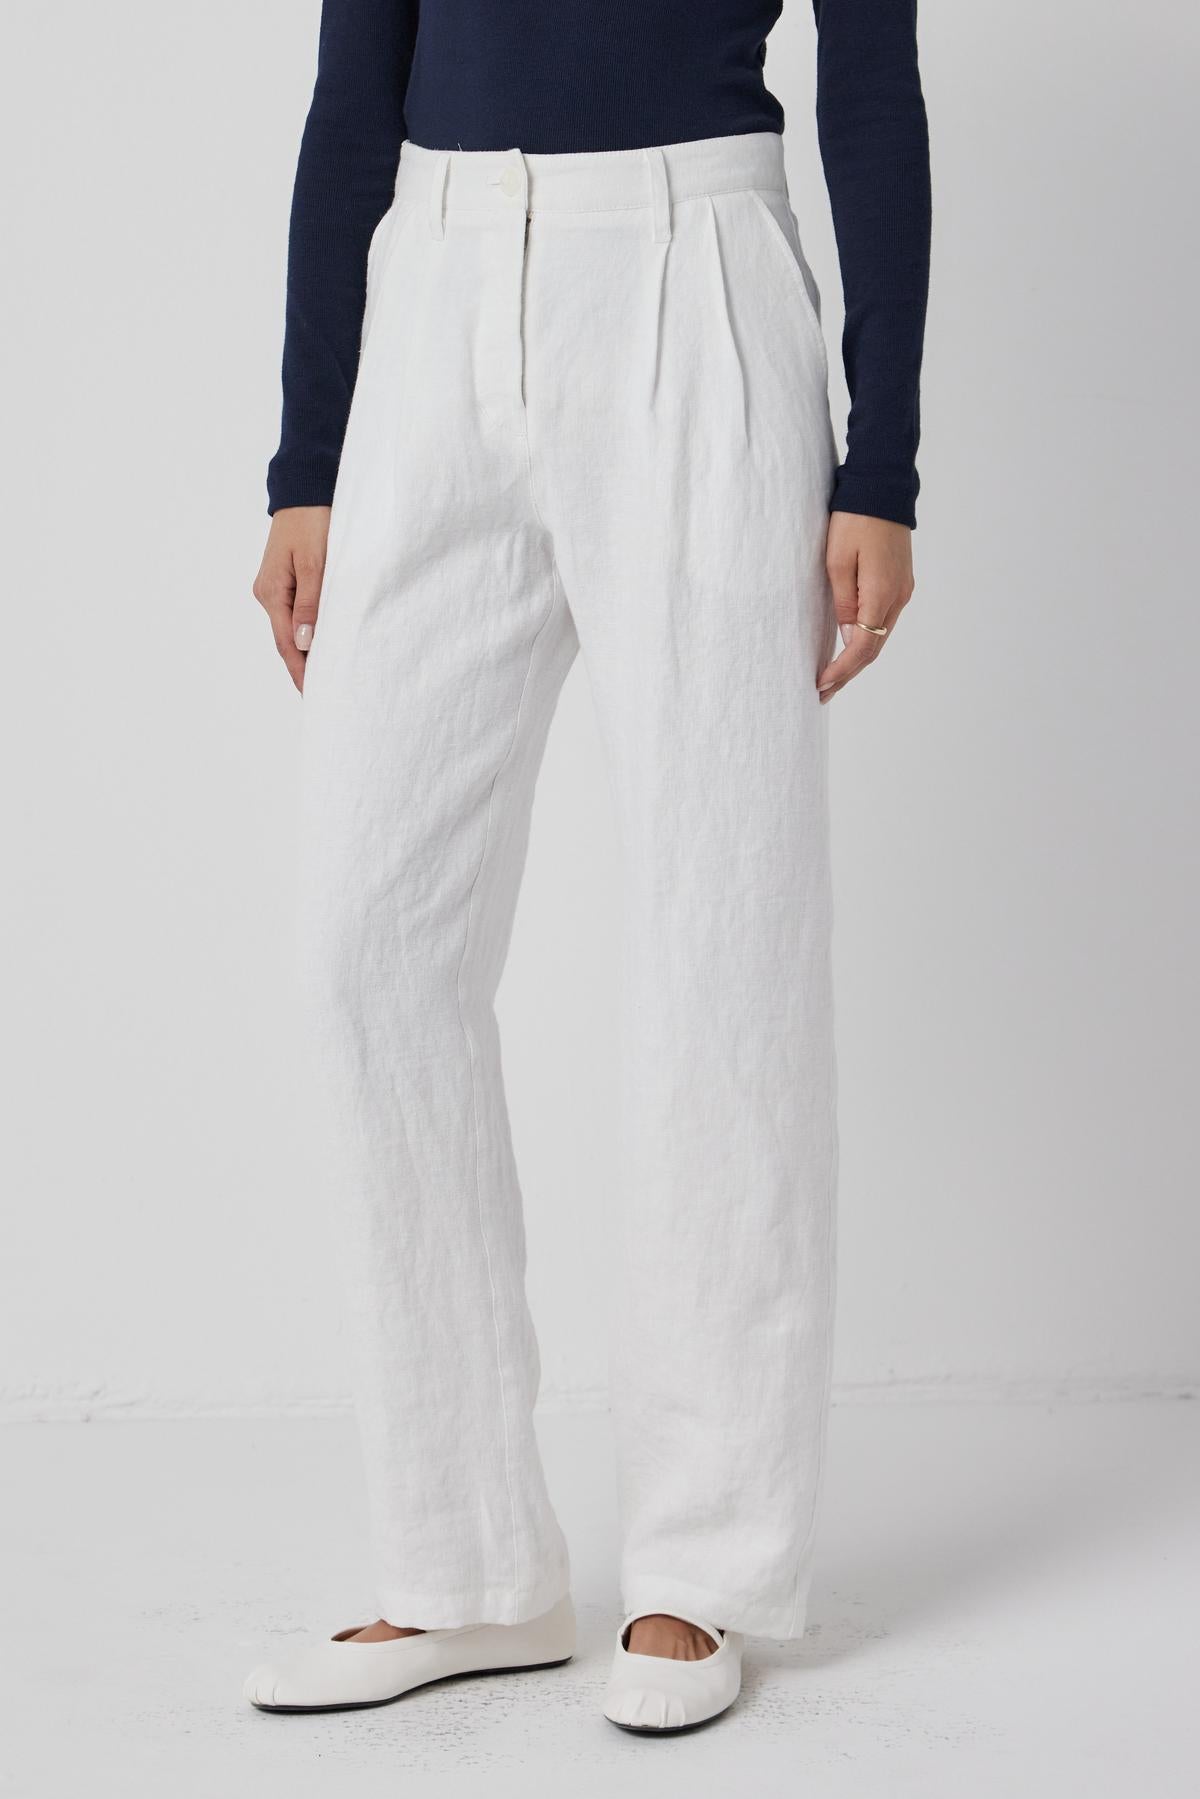 A person standing in Velvet by Jenny Graham's POMONA PANT - white straight-leg linen trousers with pockets, paired with a dark top and white flat shoes.-36463685959873